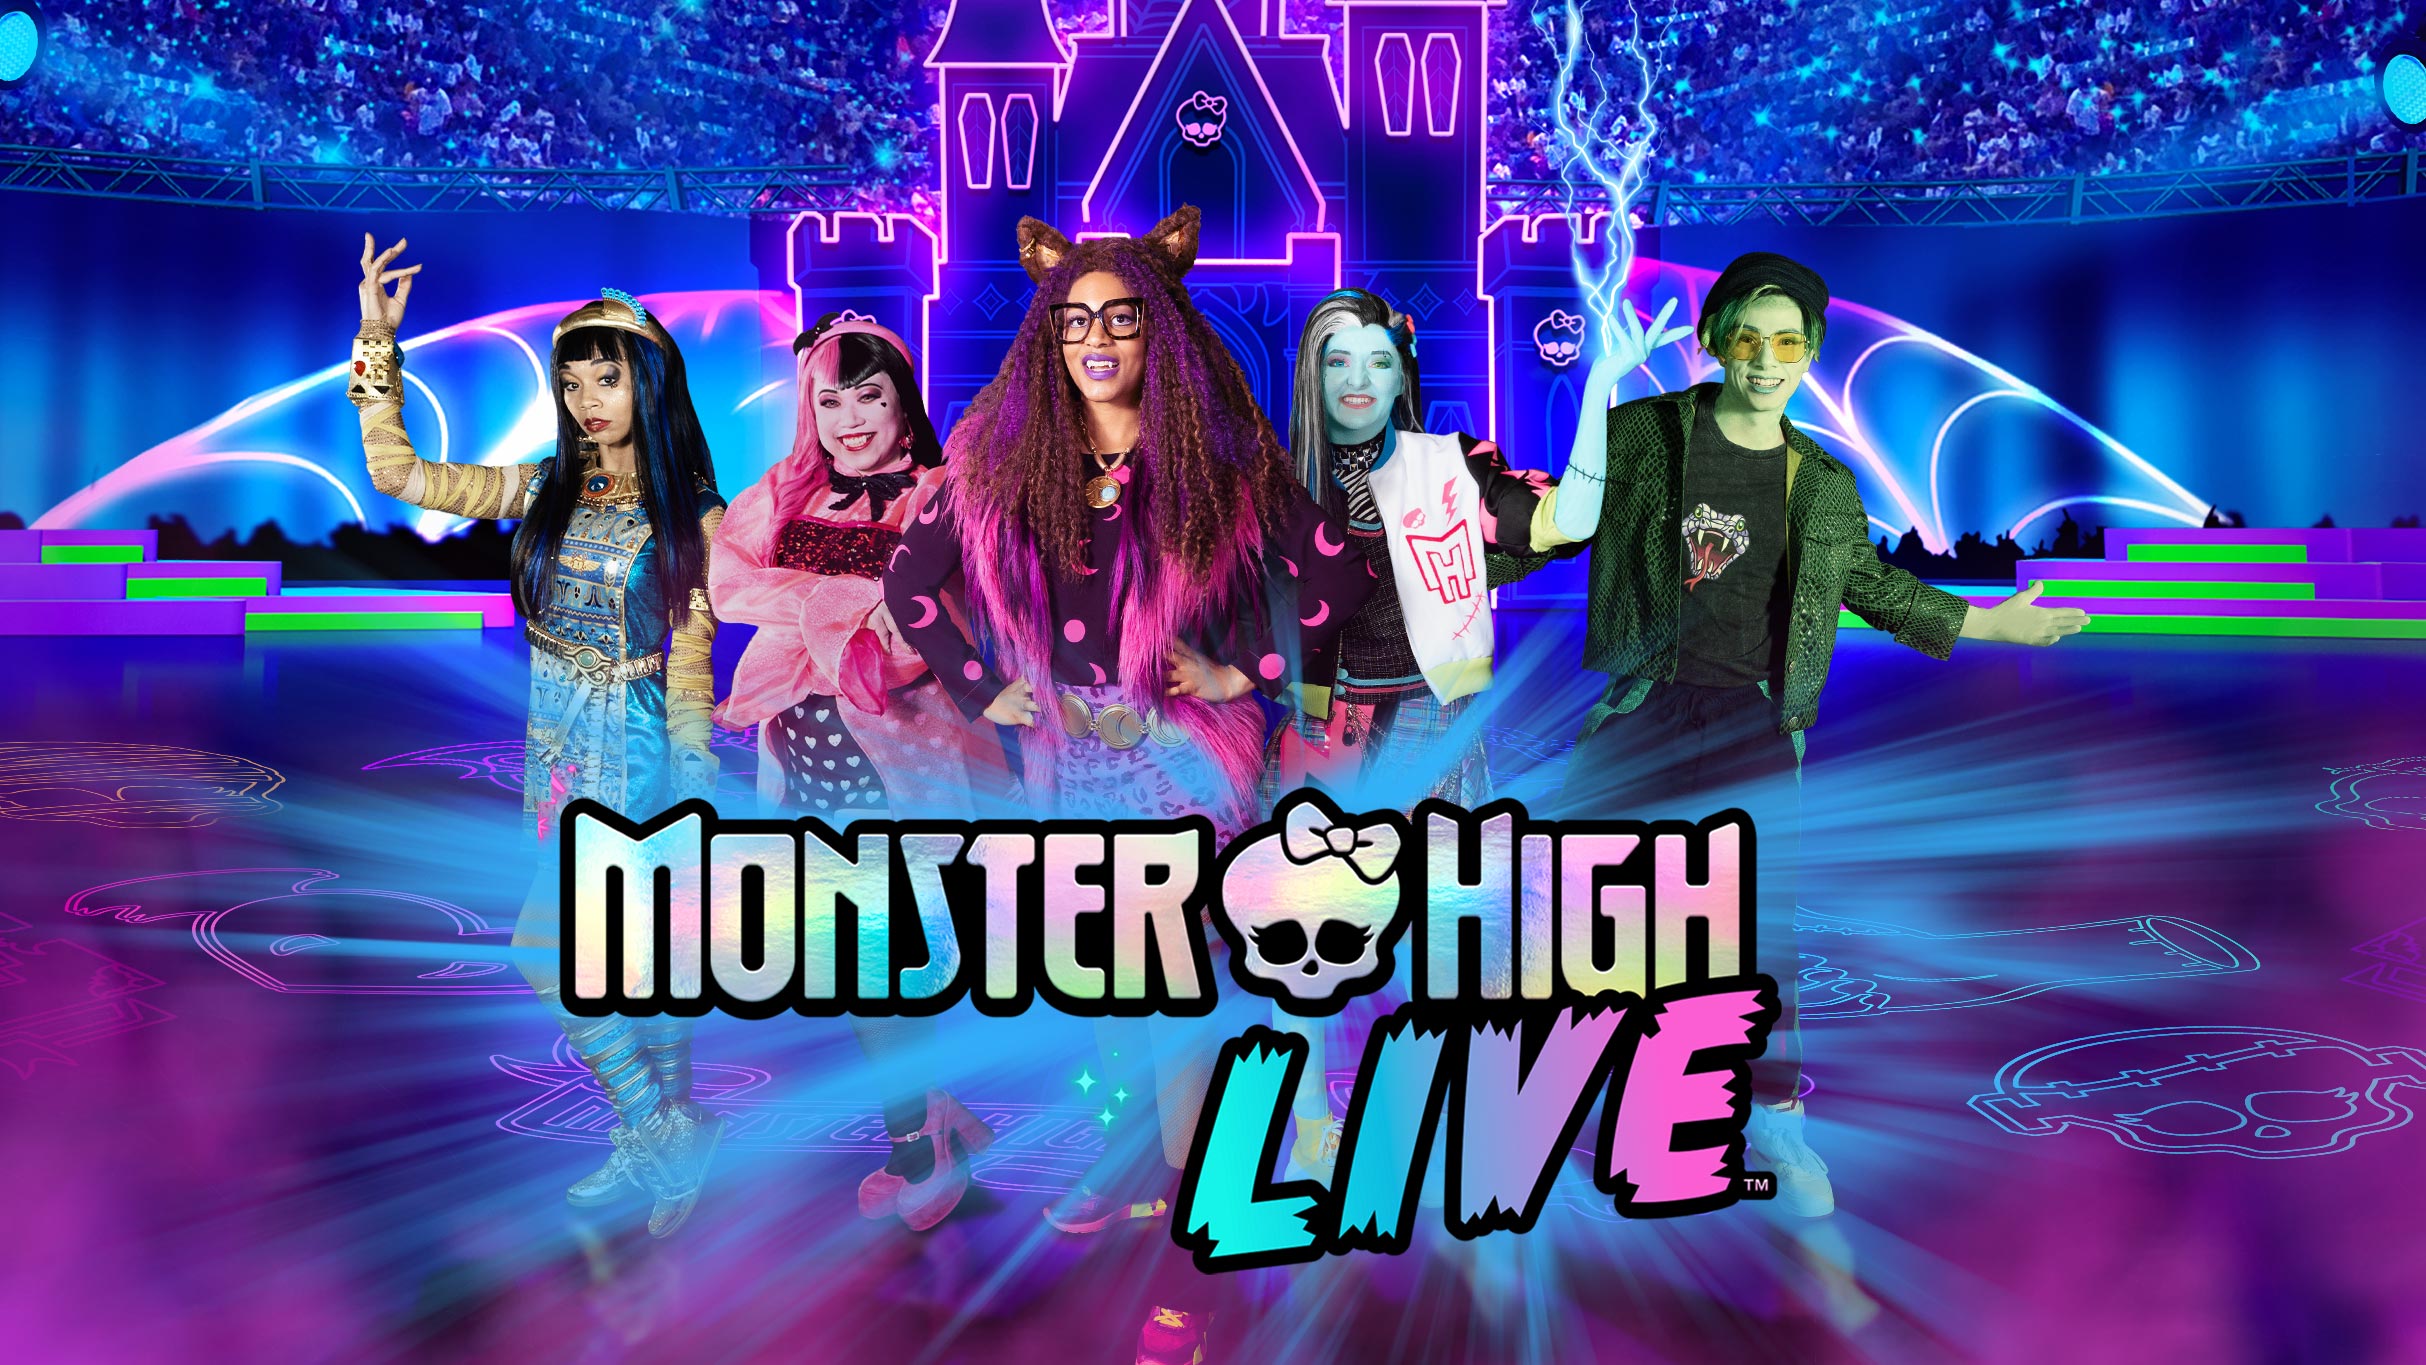 Monster High Live in Fairfax promo photo for Ticketmaster / Venue / Partner presale offer code